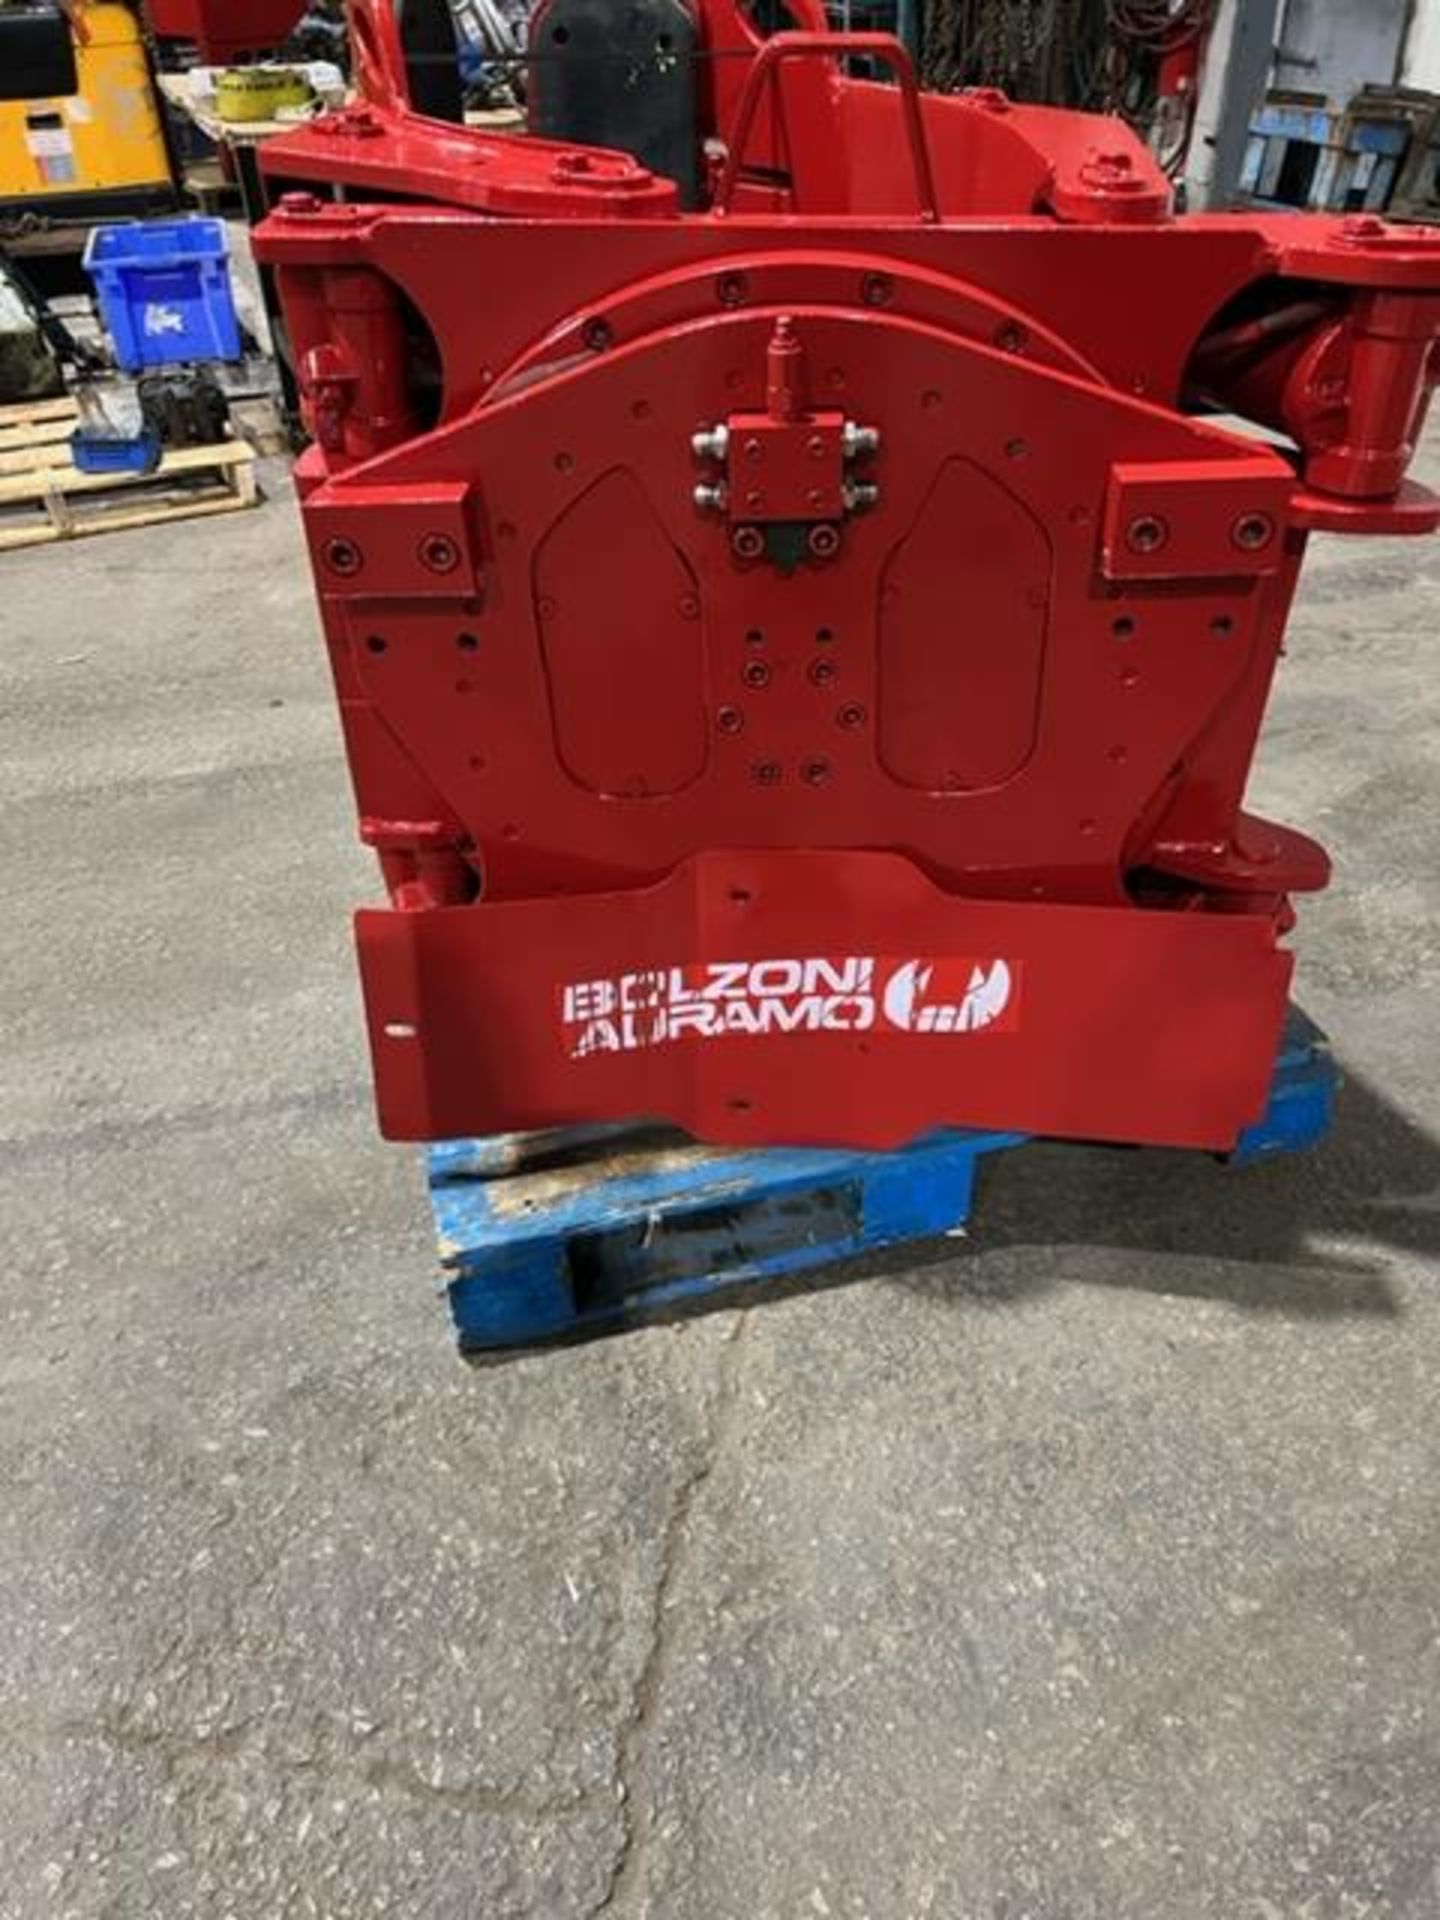 Bolzoni Auramo Forklift Clamp Attachment - Nice forklift attachment - Image 2 of 4